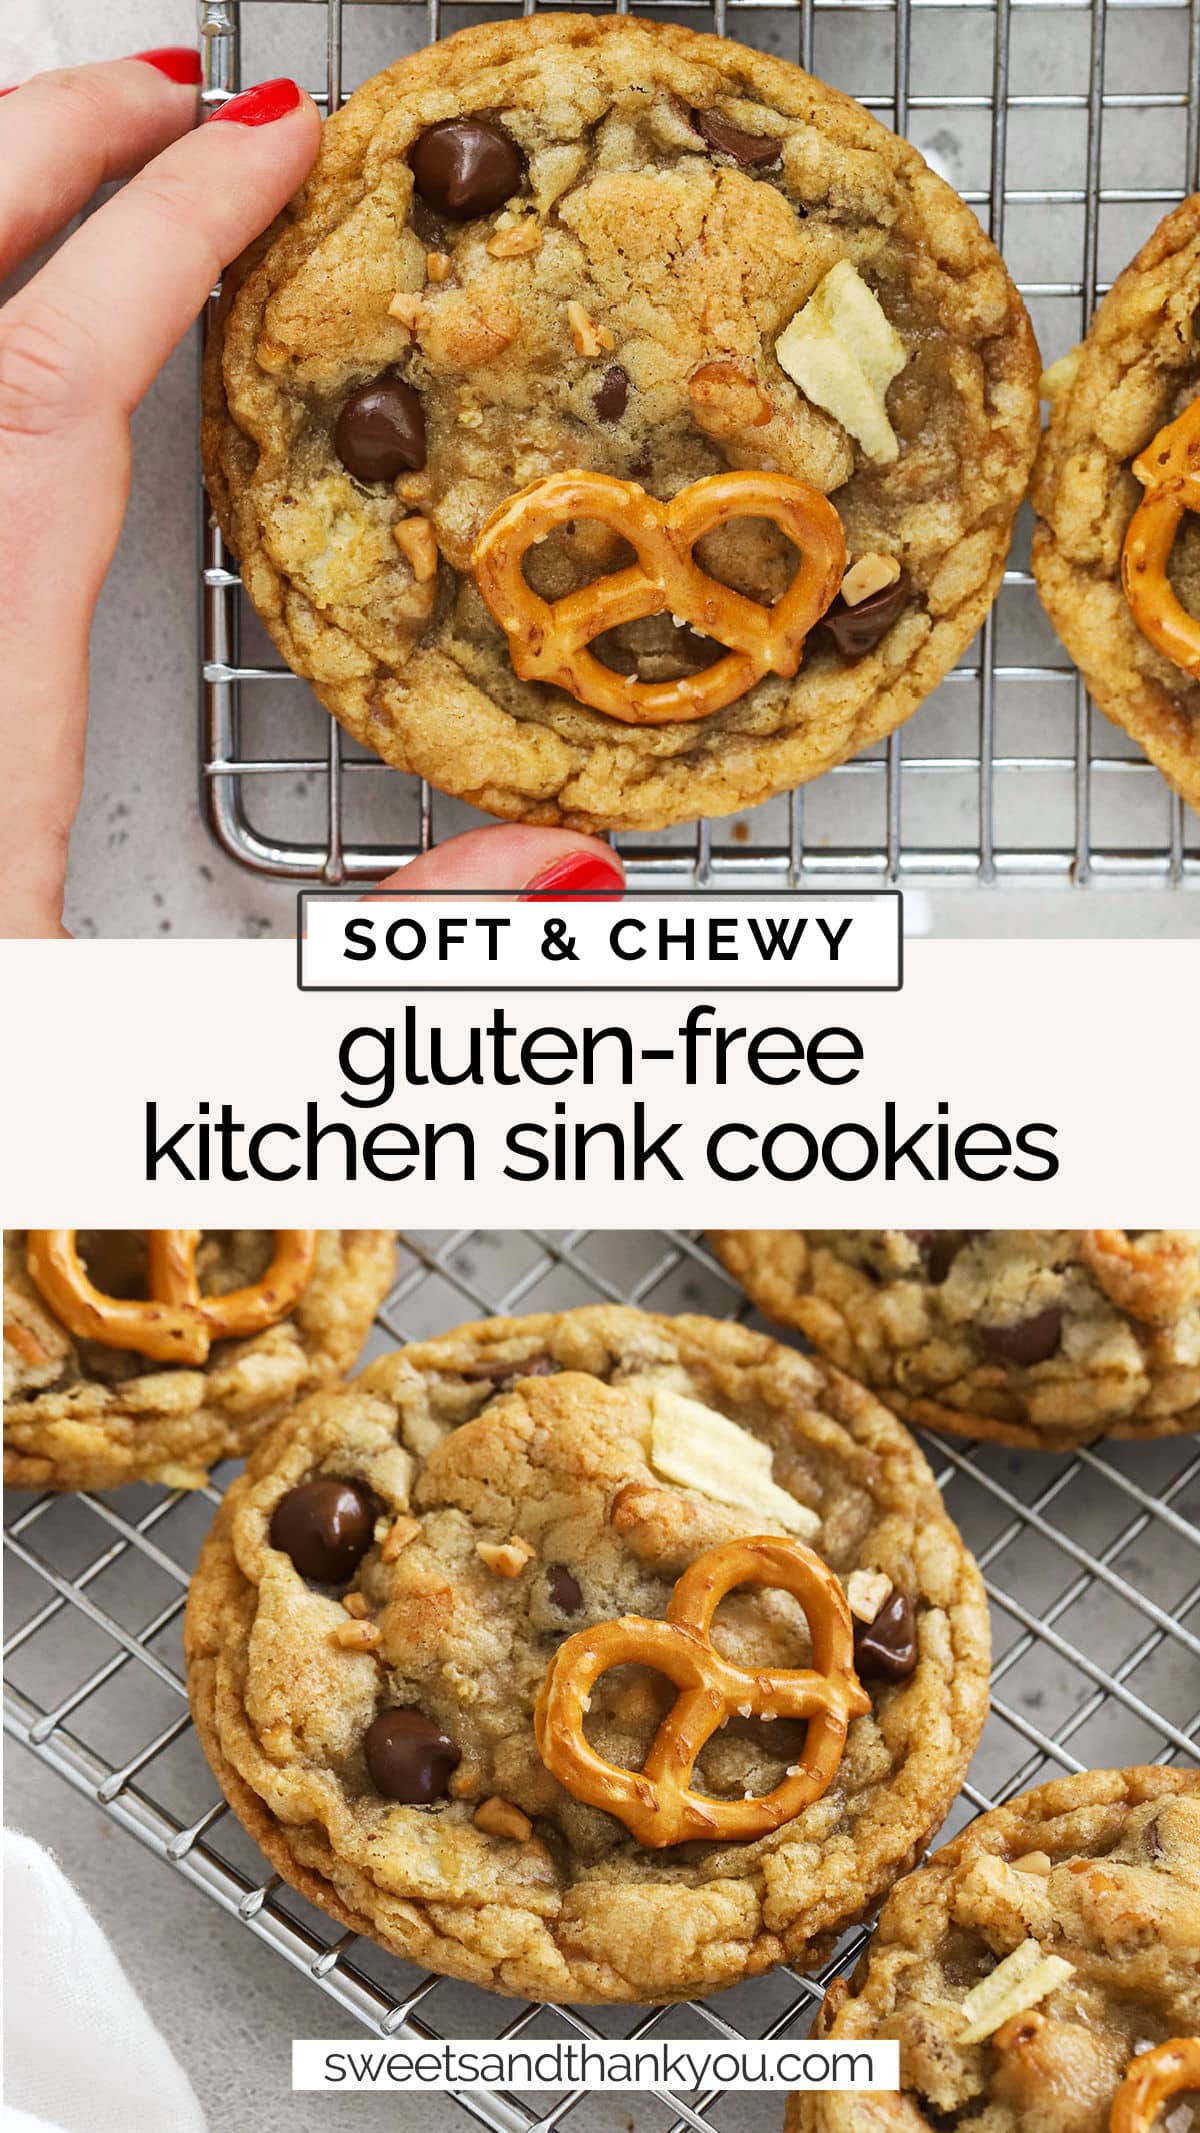 These Gluten-Free Kitchen Sink Cookies let you mix & match your way to your dream cookie. They basically have everything but the kitchen sink! / everything but the kitchen sink cookies gluten free / gluten free kitchen sink cookie recipe / gluten-free cookies / gluten-free chocolate chip cookies / gluten-free cookies with pretzels / gluten-free cookie recipe / gluten free panera cookies / gluten-free panera kitchen sink cookies